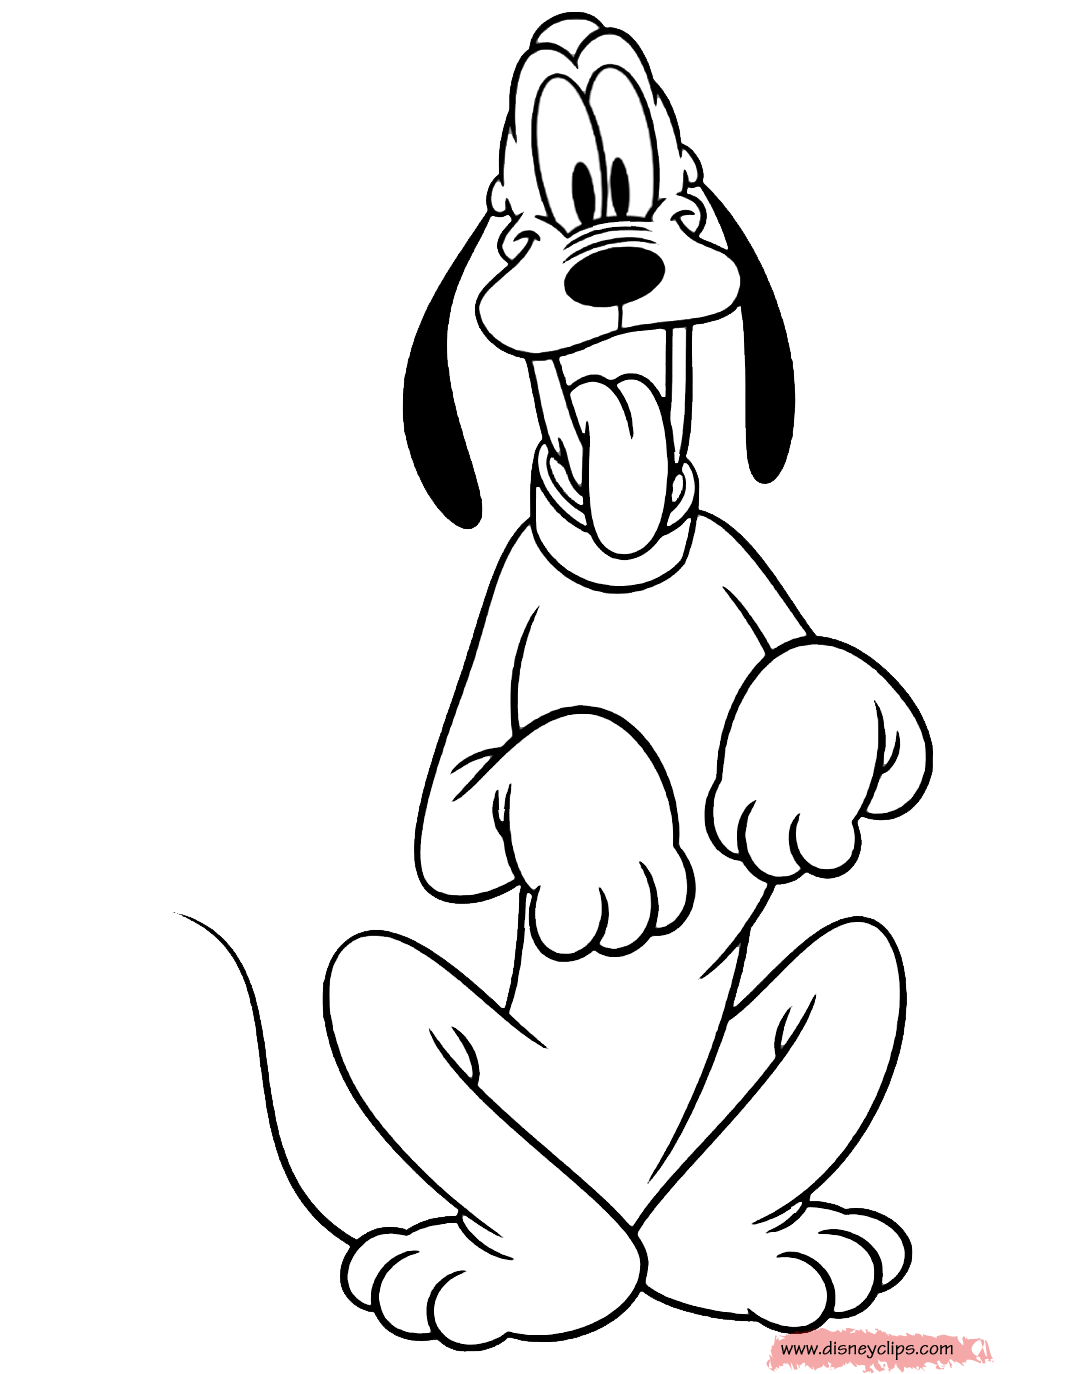 Pluto Coloring Pages (2) | Disneyclips.com